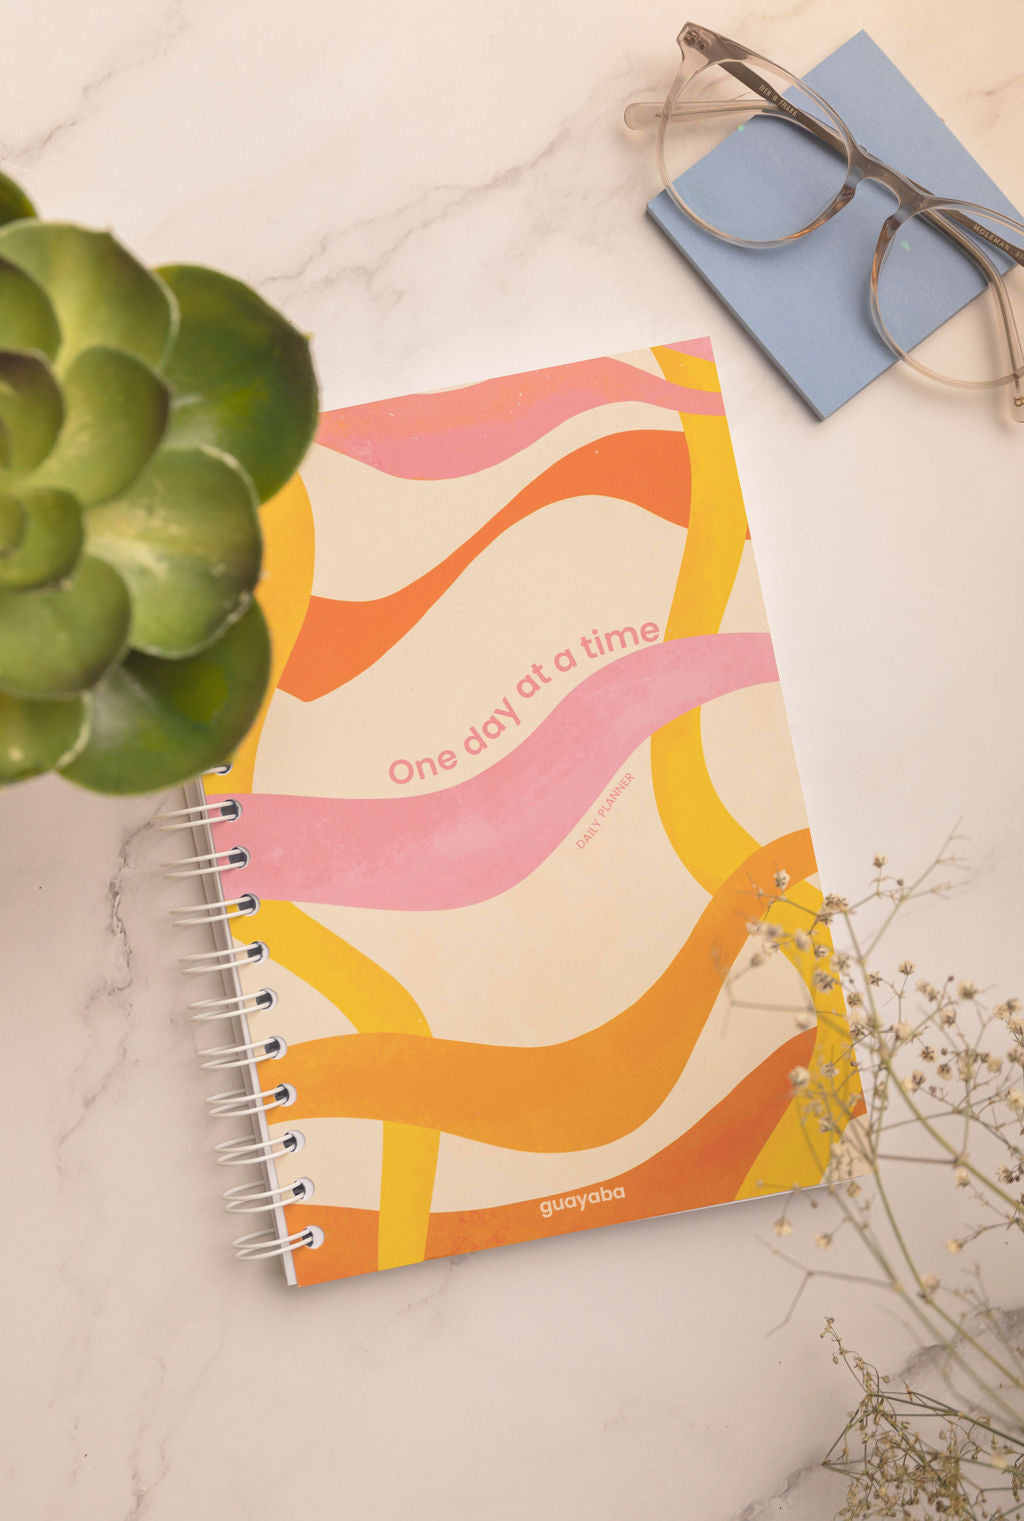 Daily Planner - One day